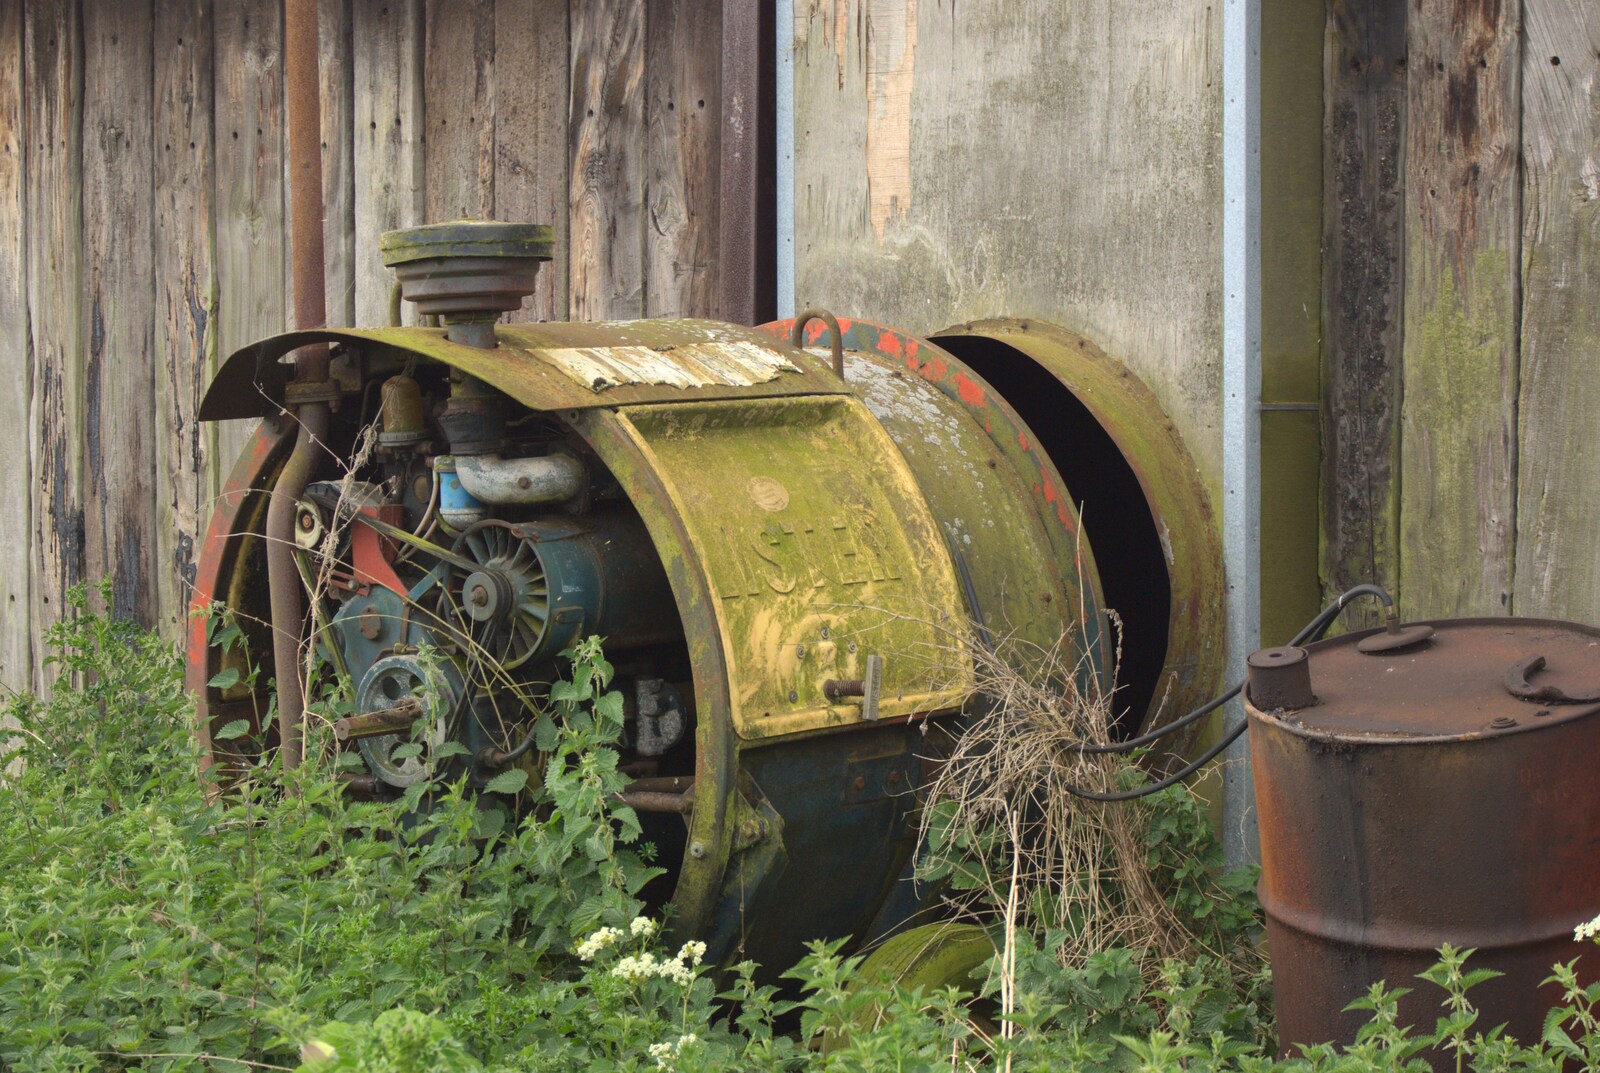 An old lister blower from A Christening, Wilford, Northamptonshire - 22nd May 2011